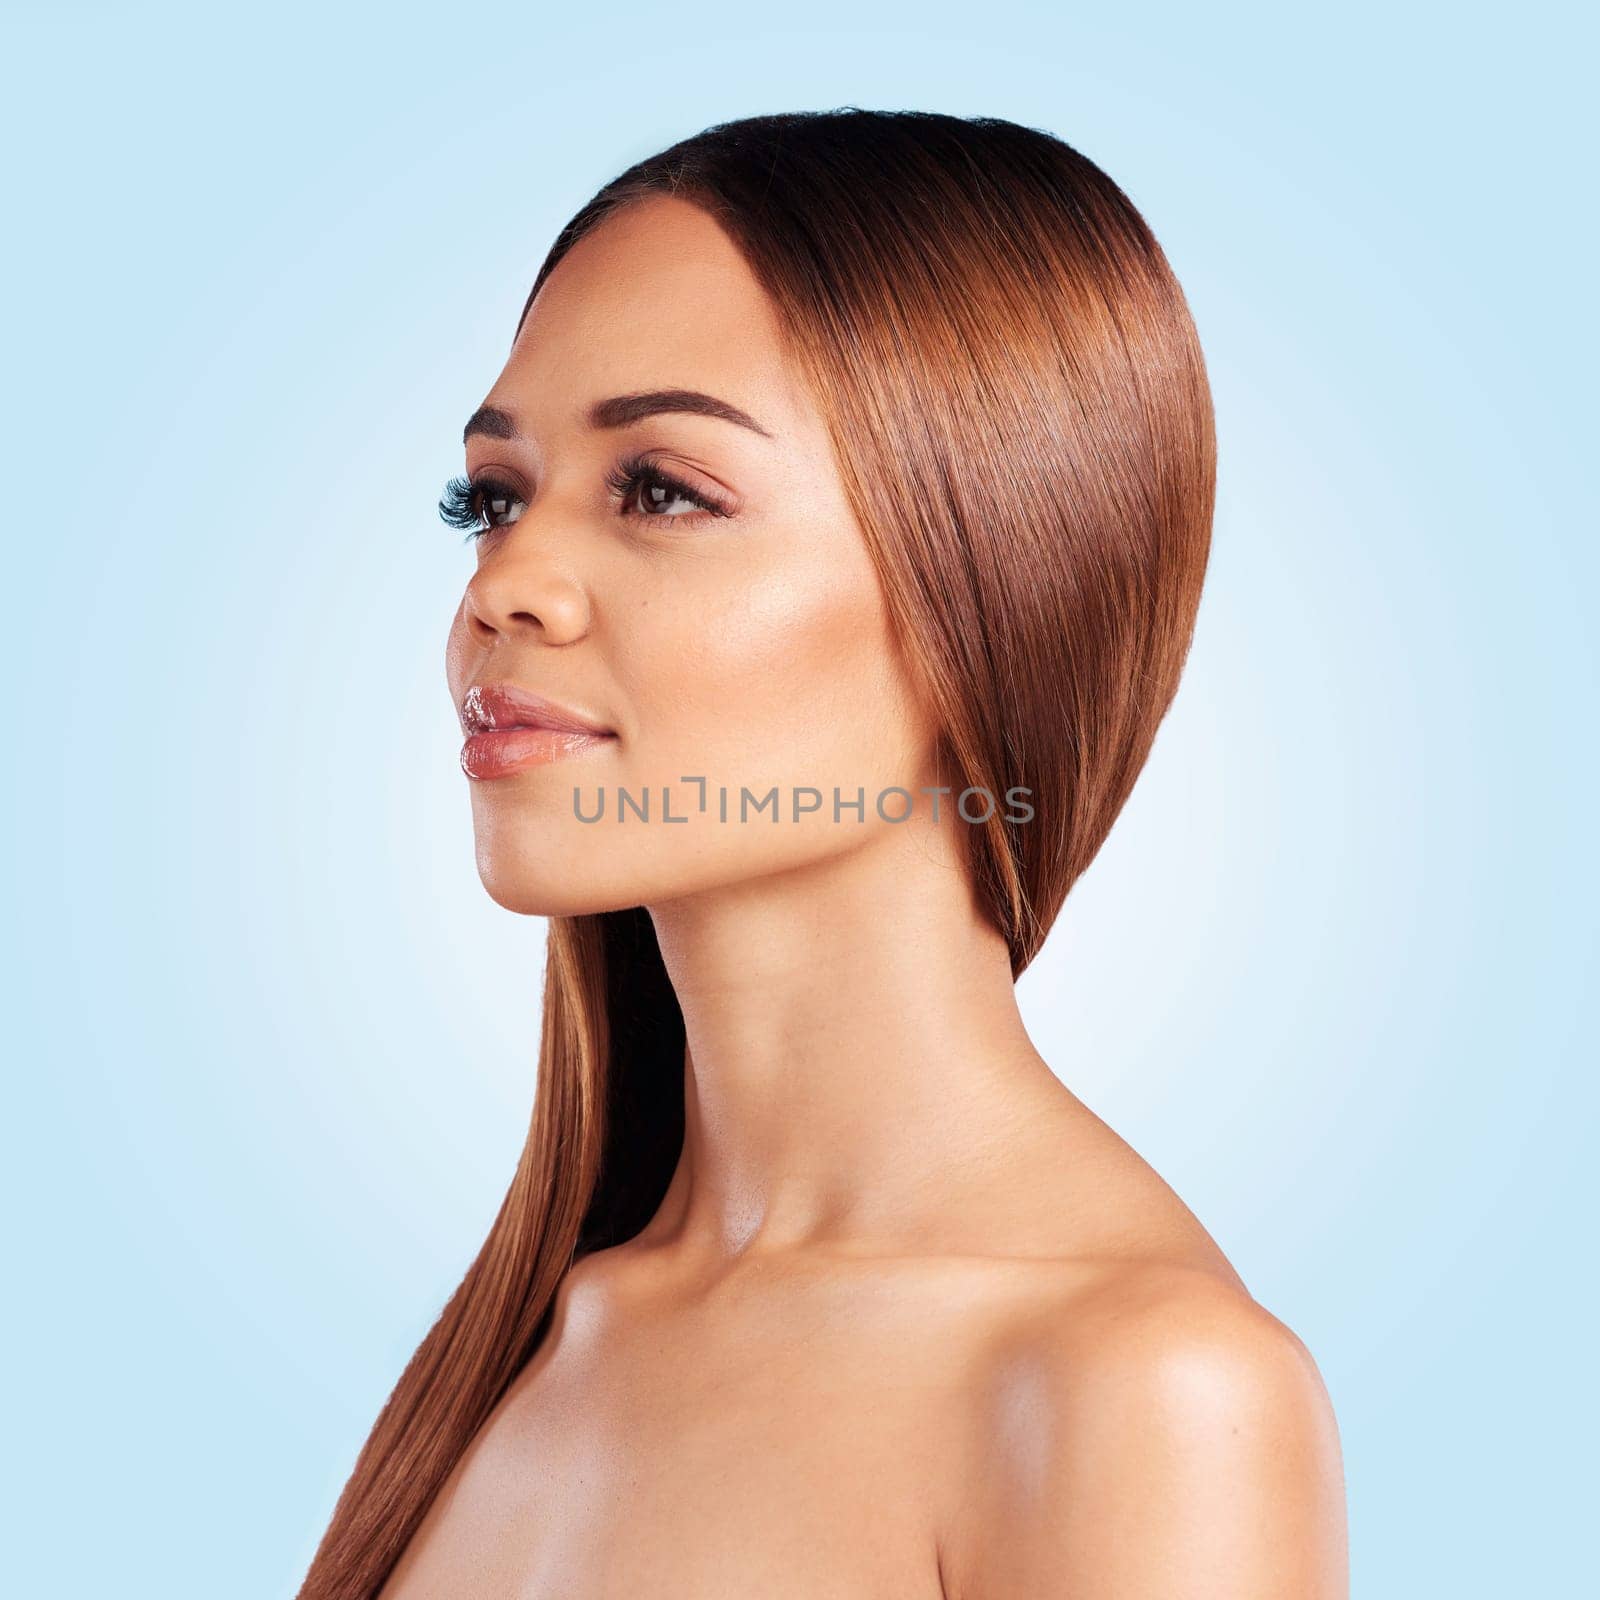 Face, skincare and hair care of woman in studio isolated on a blue background. Hairstyle cosmetics, thinking and aesthetics of young female model with salon treatment for growth, texture and balayage.